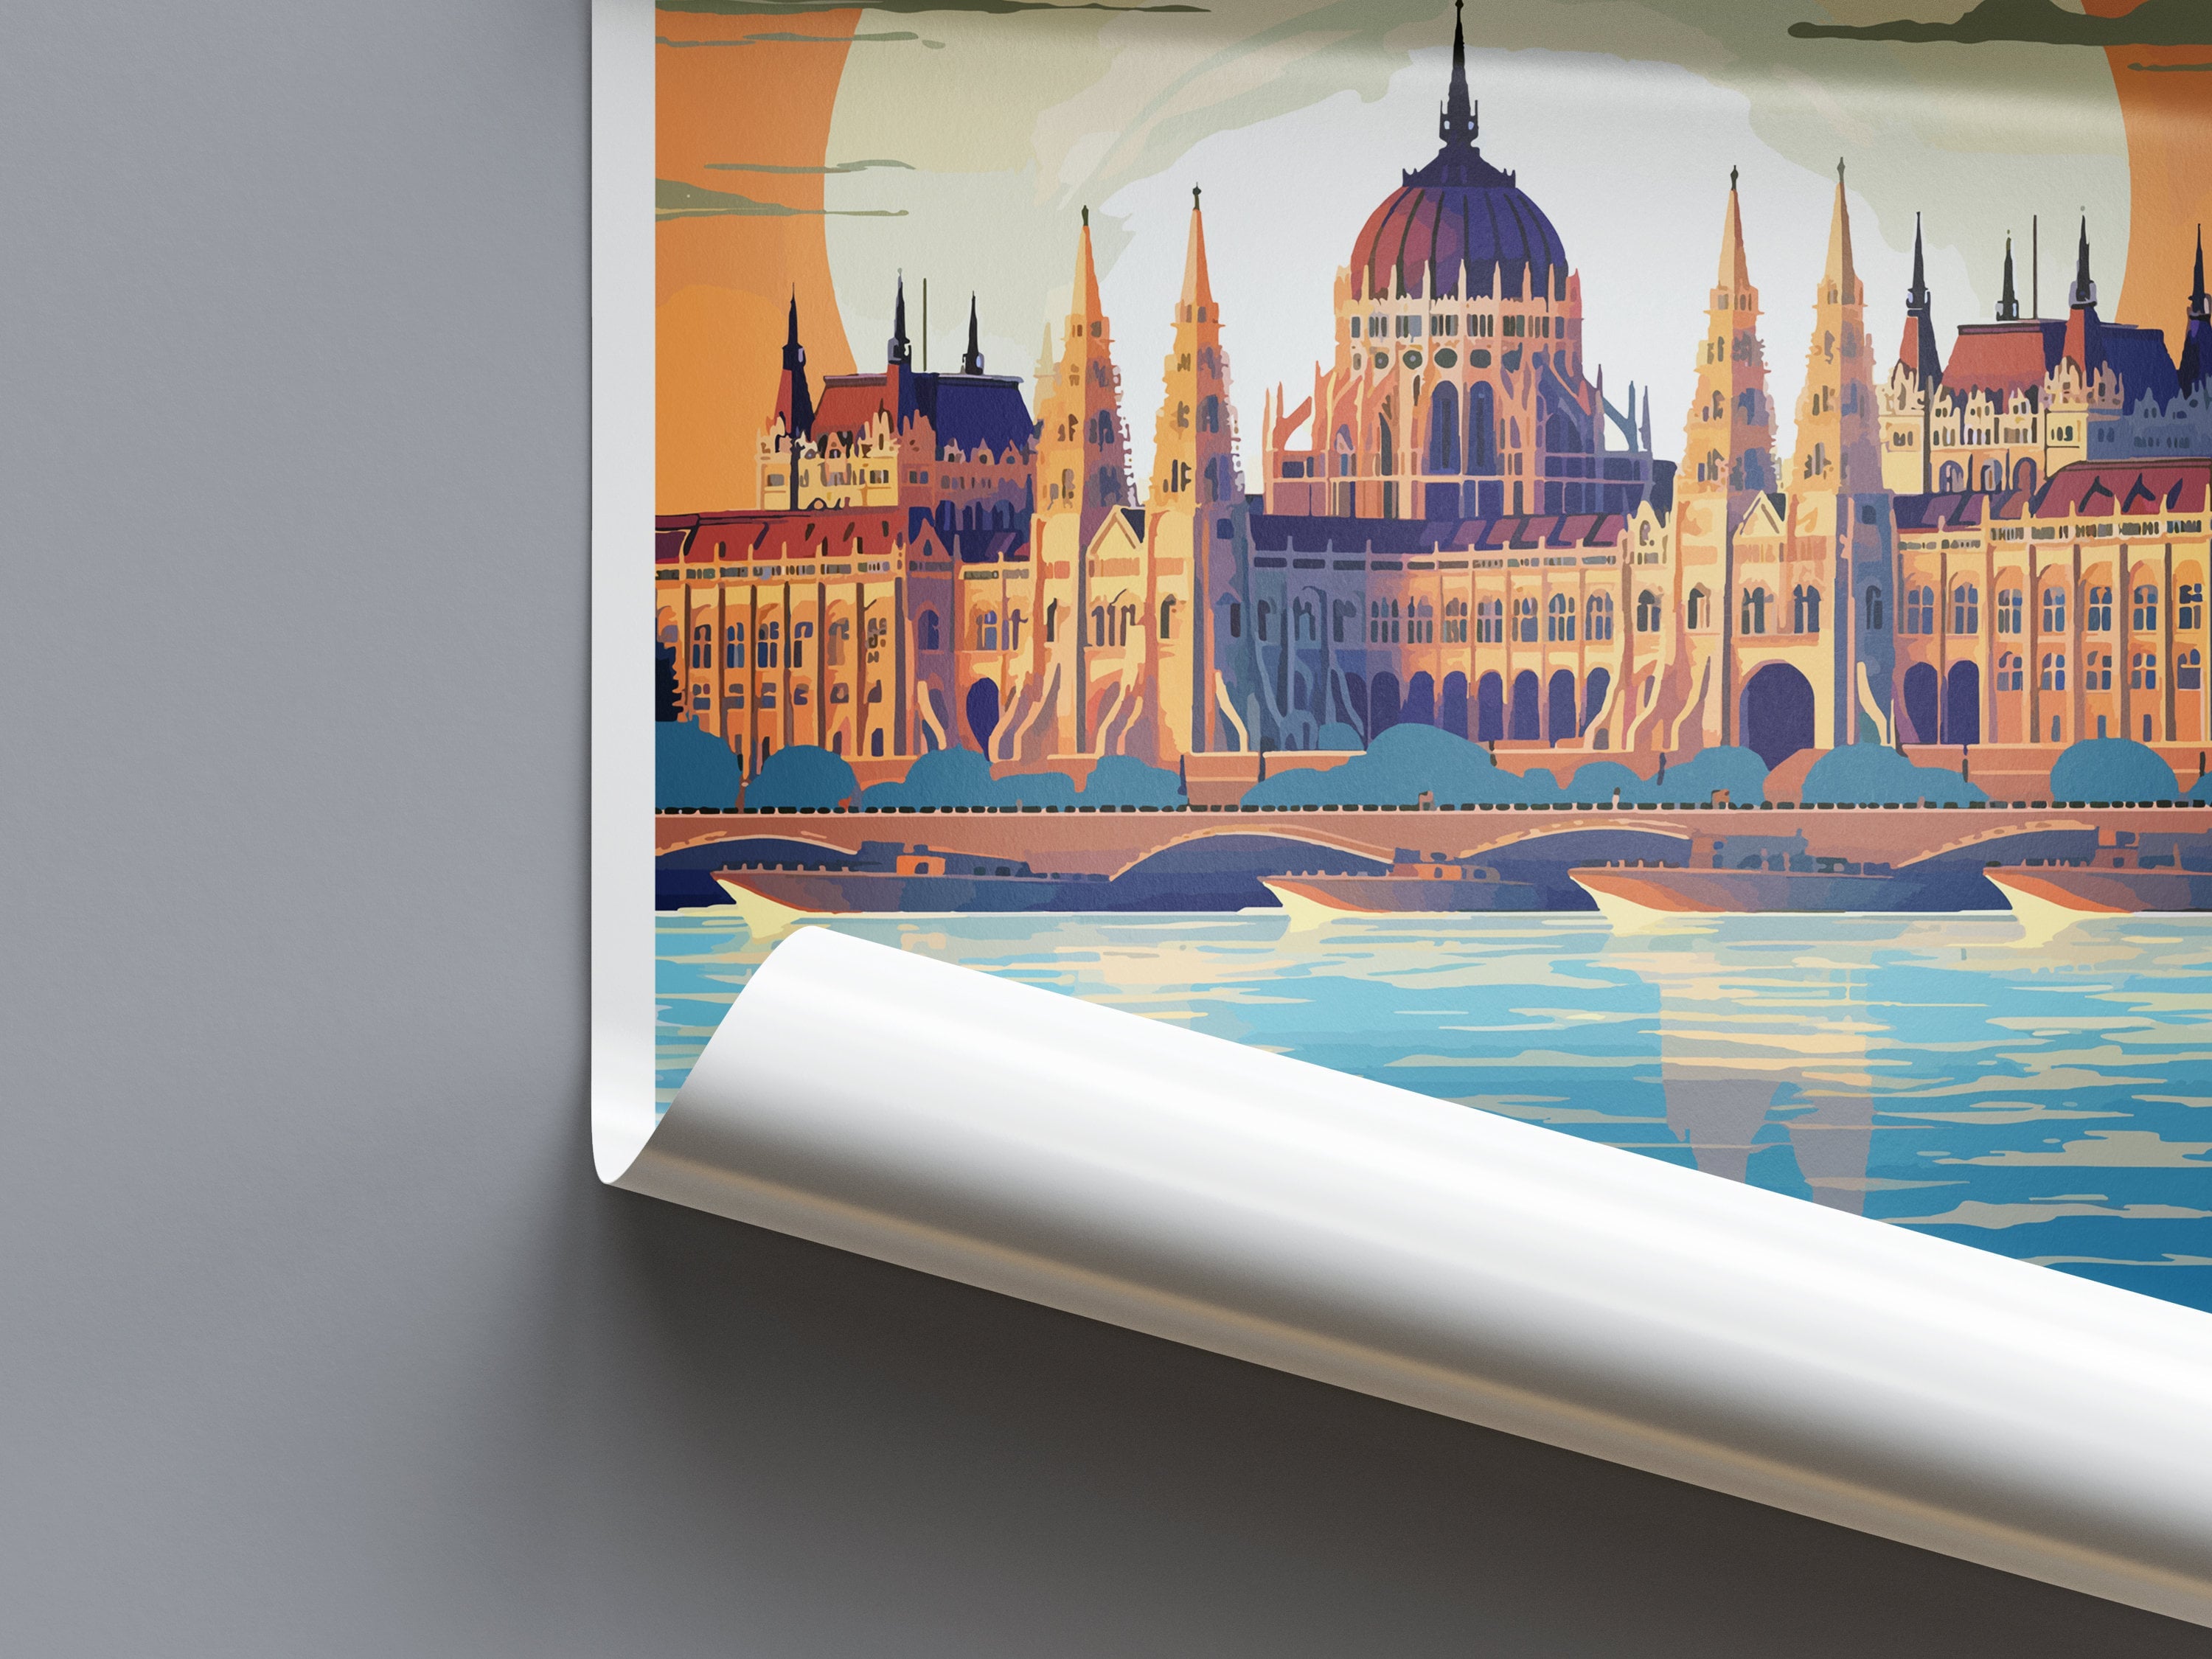 Budapest Travel Print Wall Art Budapest Wall Hanging Home Décor Budapest Gift Art Lovers Hungary Art Lover Gift Budapest Wall Décor